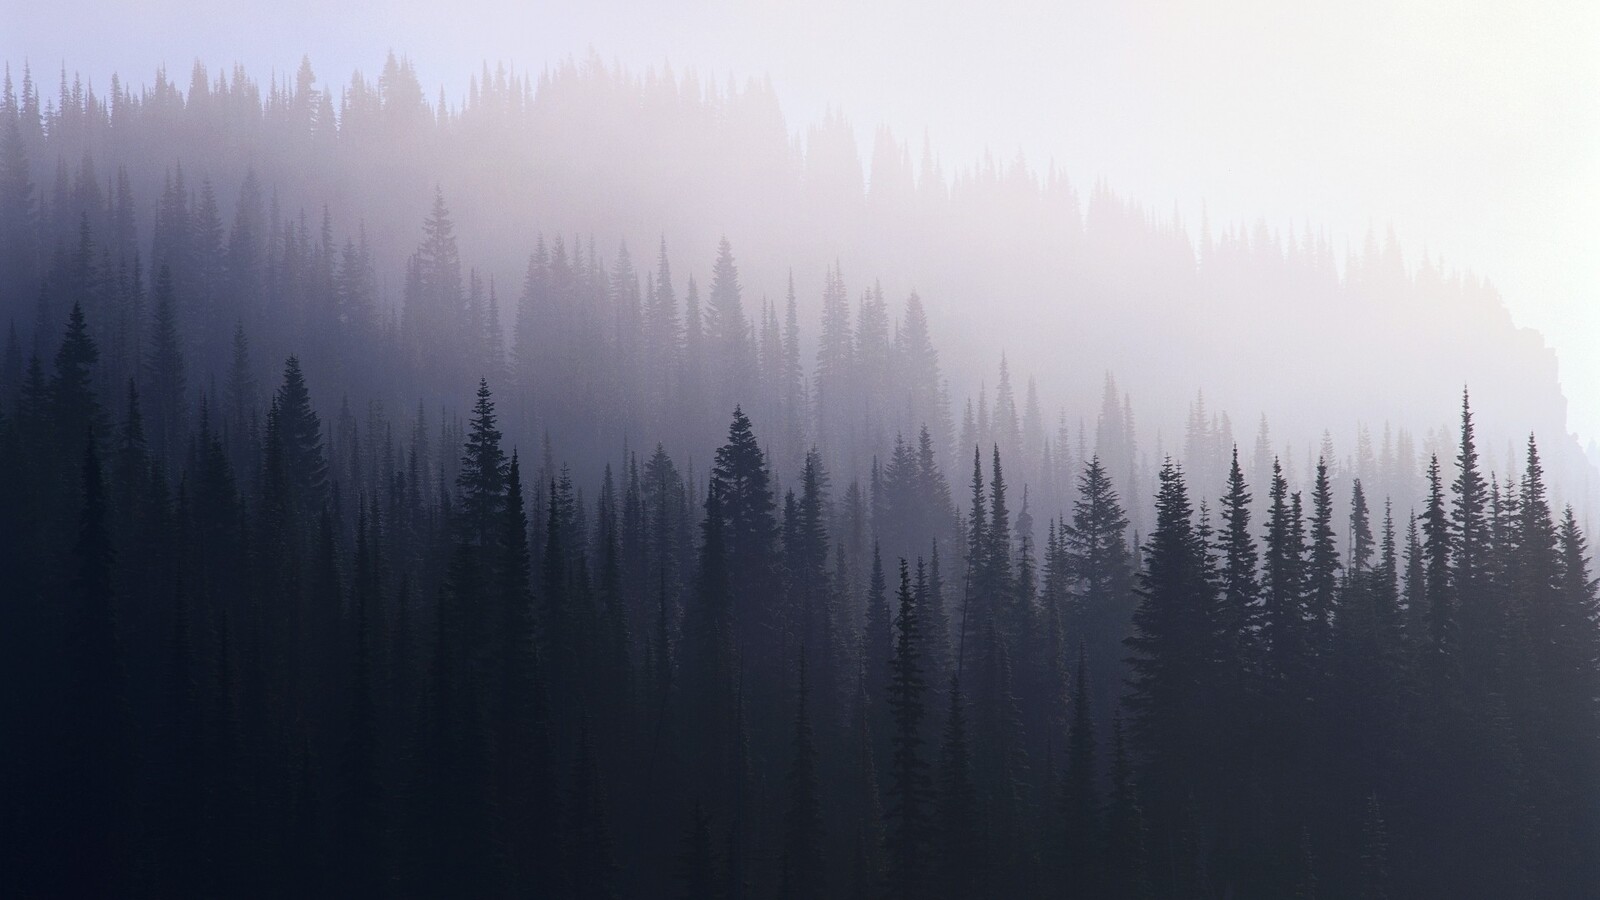 A mountain with trees and fog in the background - Forest